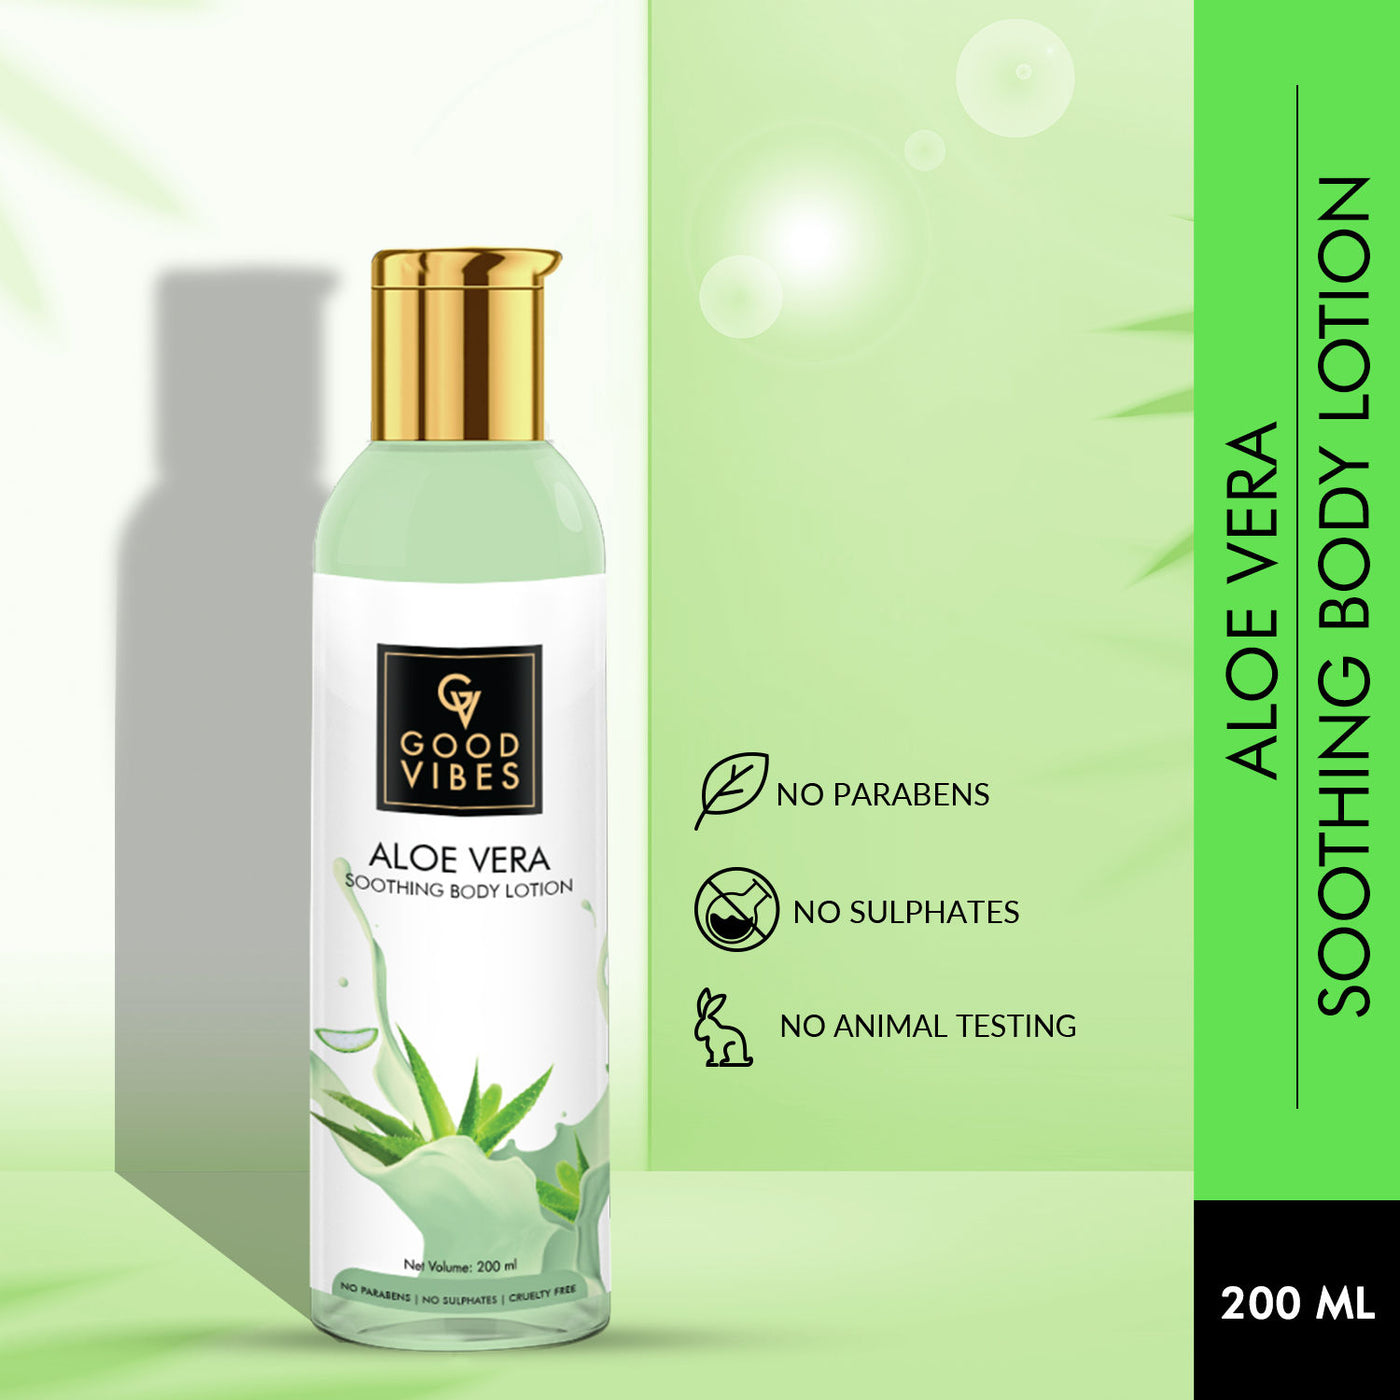 good-vibes-soothing-body-lotion-aloe-vera-200-ml-17-2